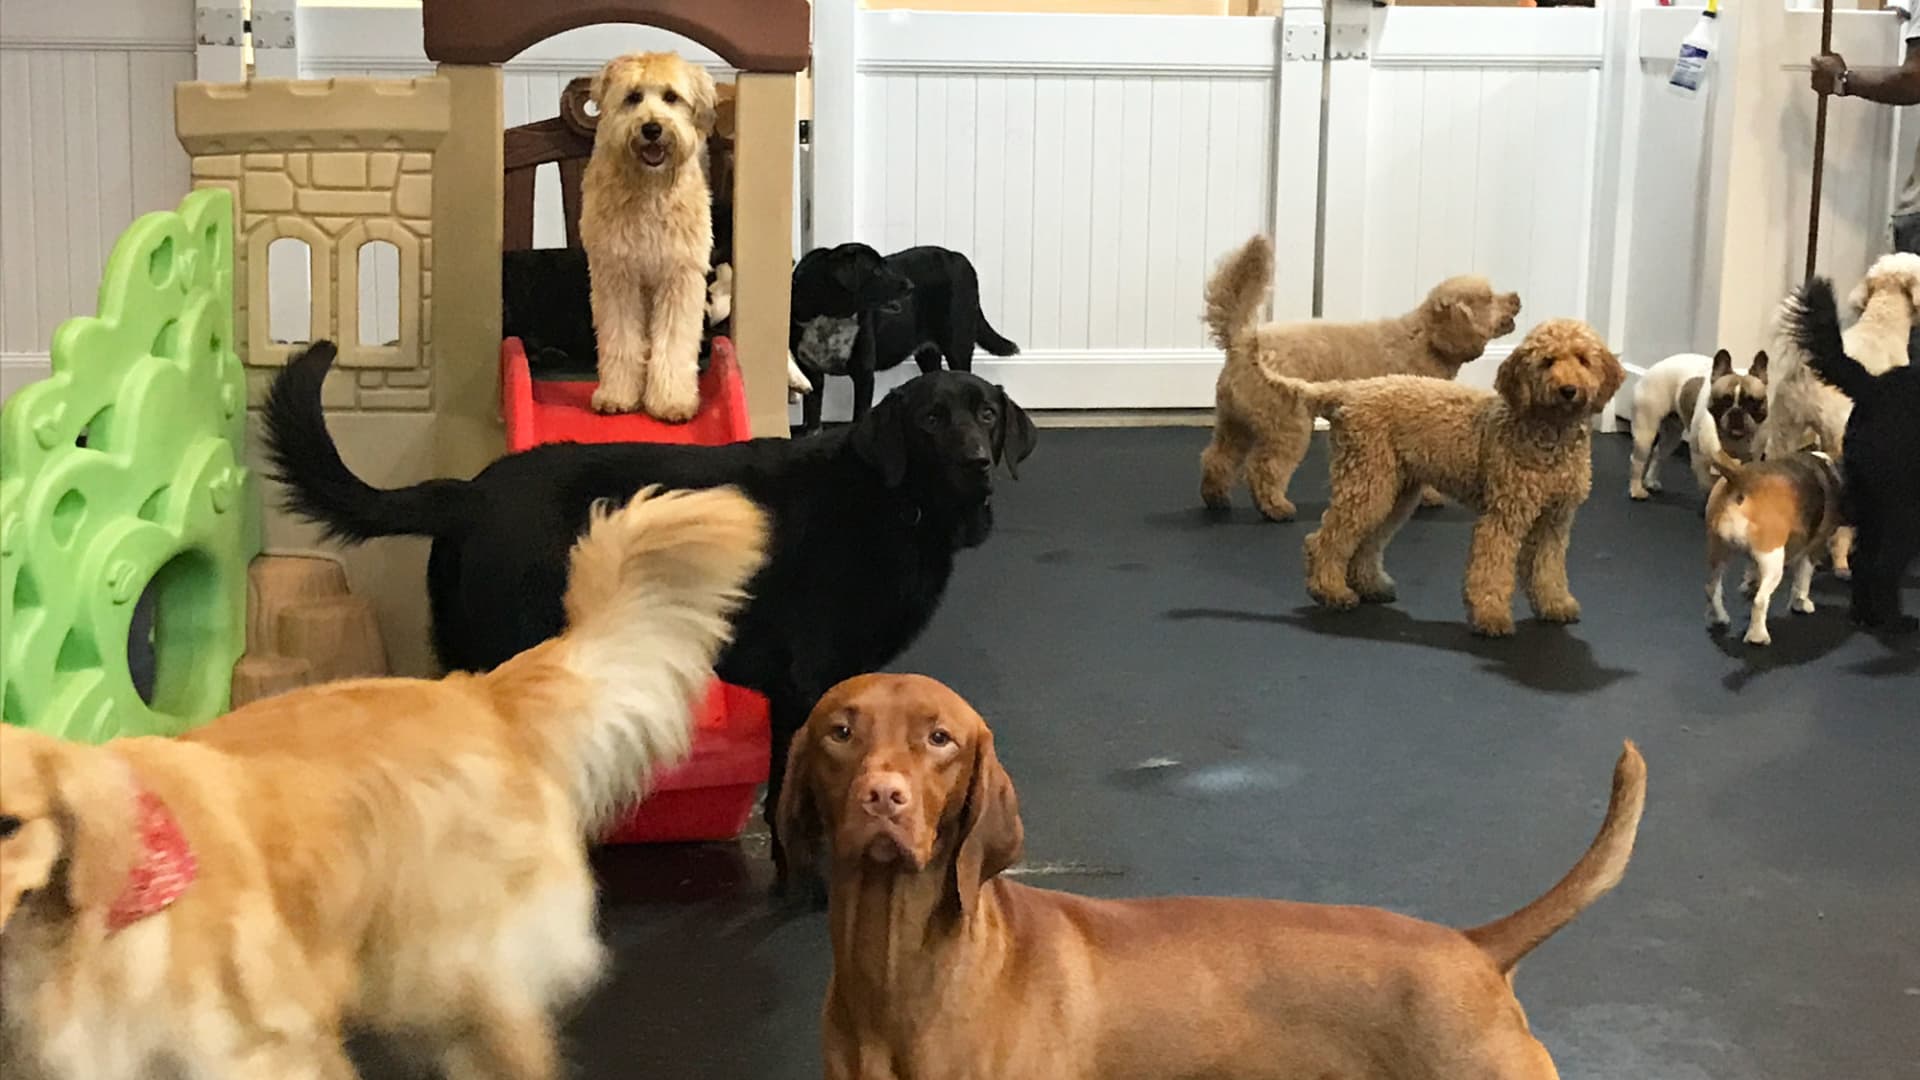 The best rooms for your dog will be in pet boarding